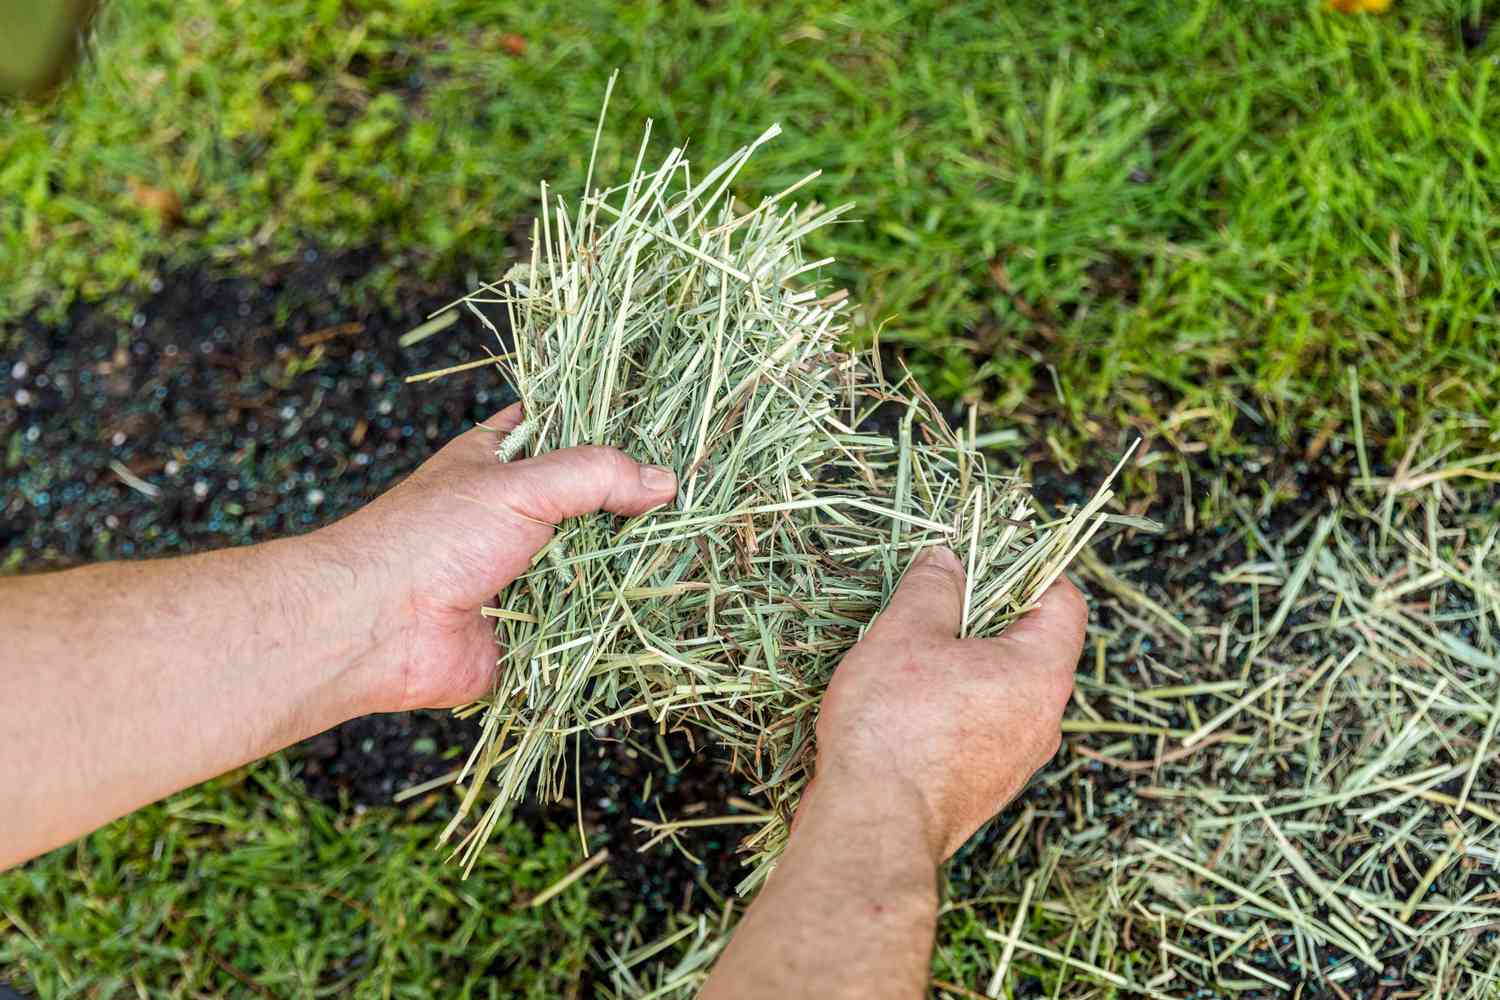 The Surprising Mistake I Made With Grass Seed - You Won't Believe What Happened Next!